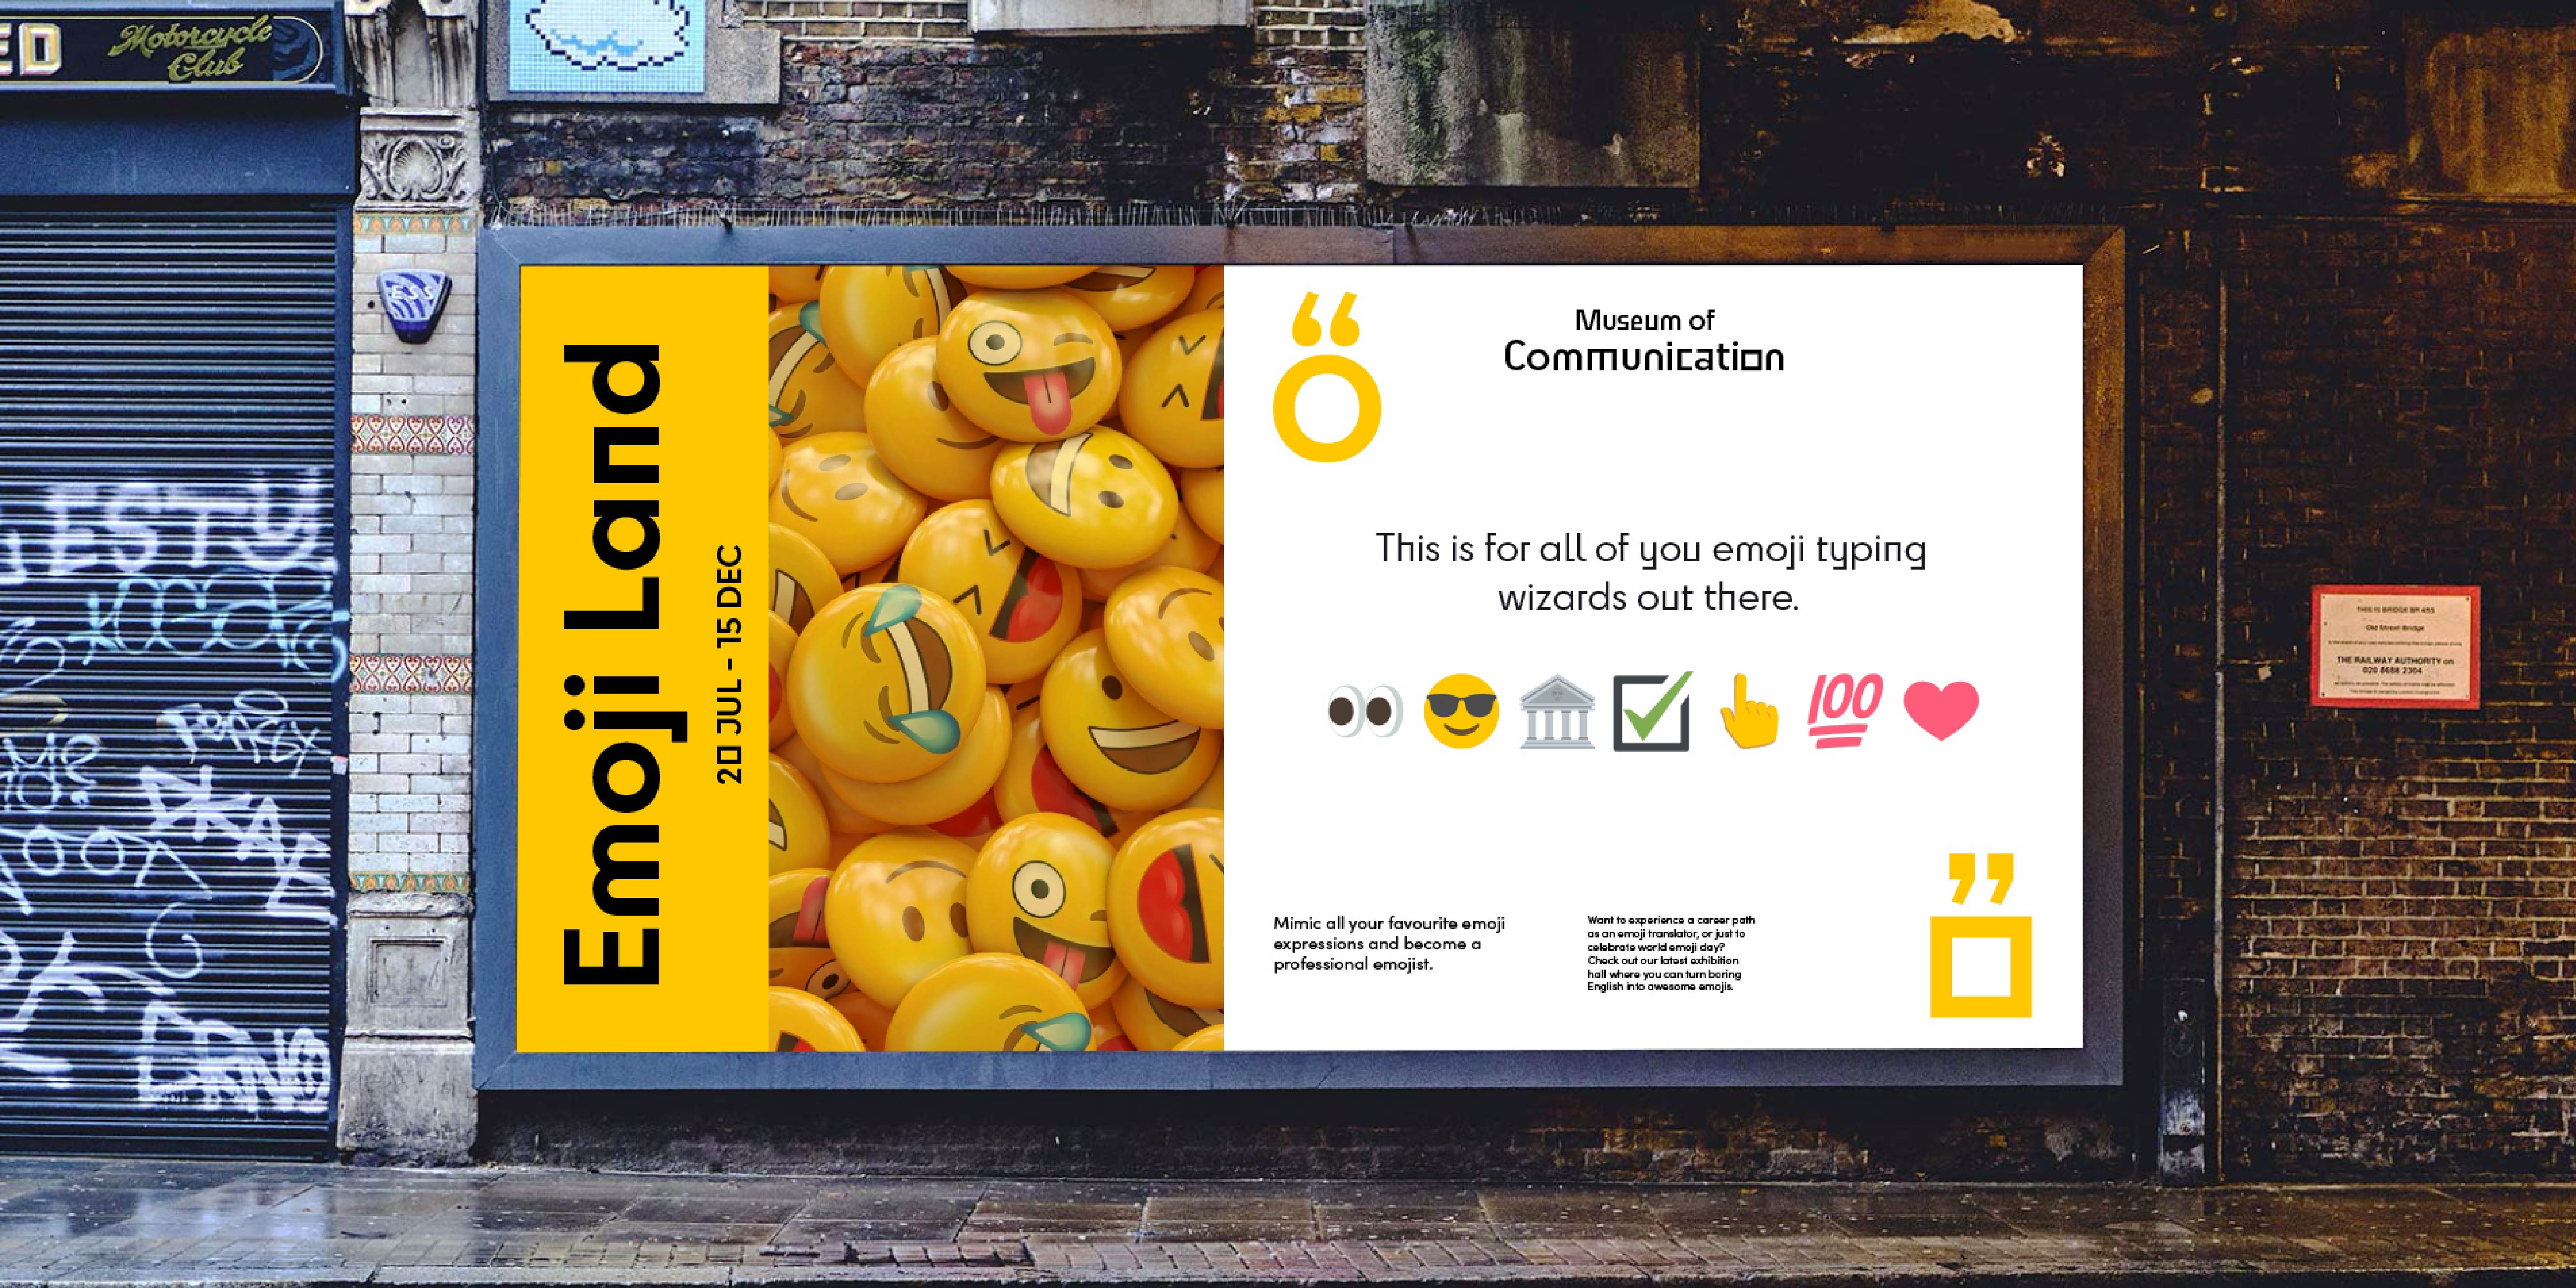 Graphic Communication work by Dominik Sobolewski showing a museum branding created for The Museum of Communication. A billboard poster containing a photograph of emoji face badges, and text about the museum.